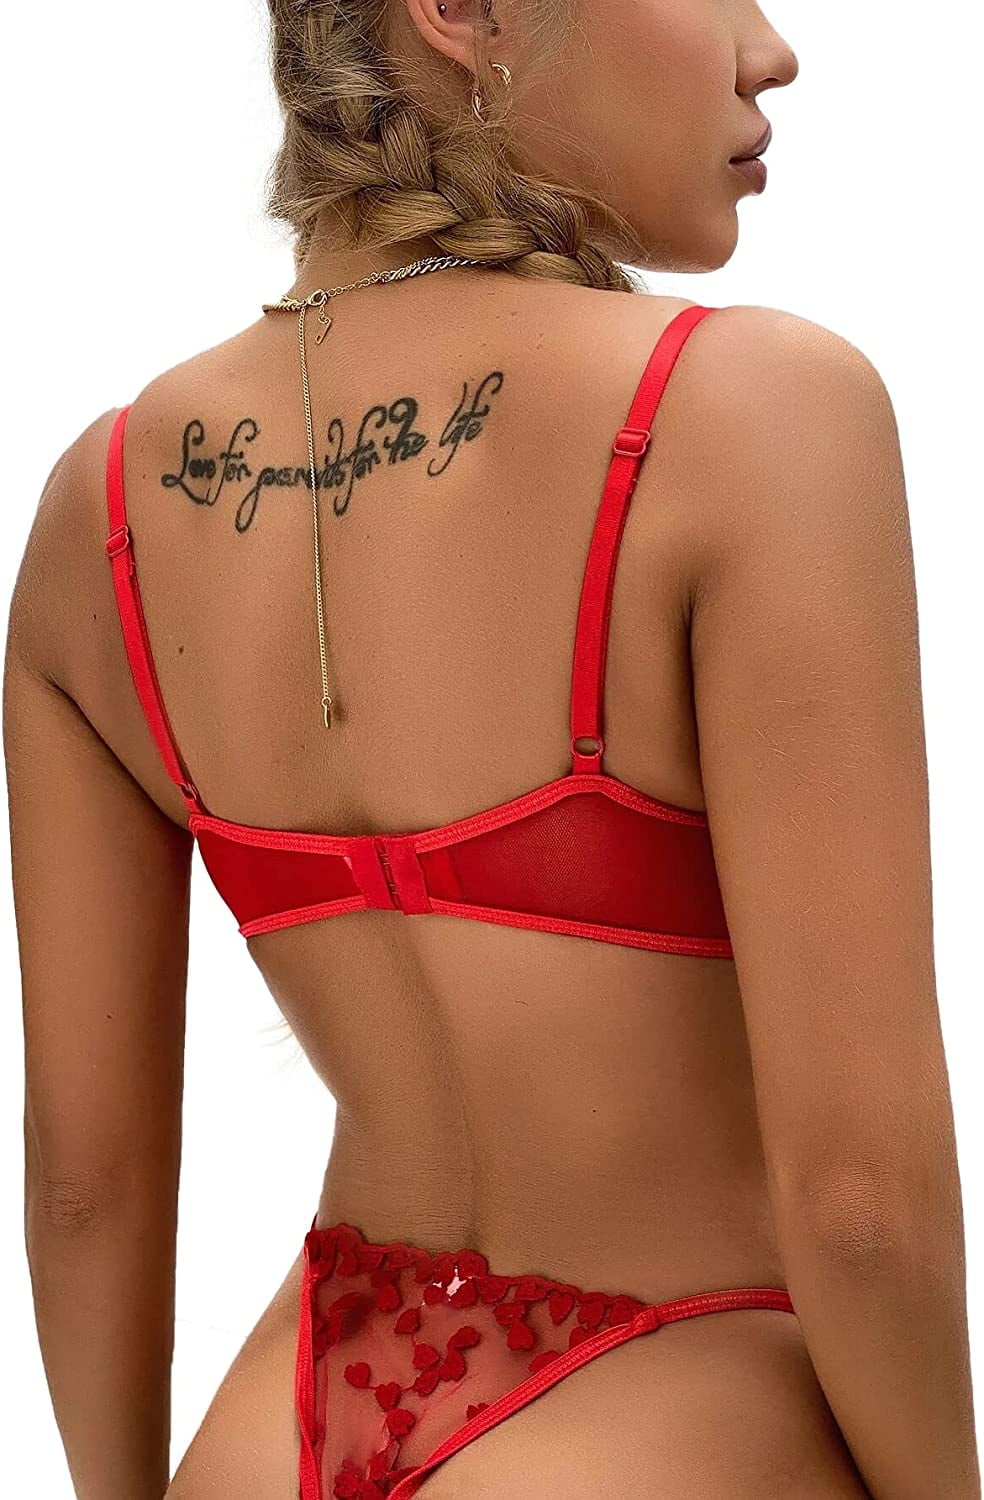 Lilosy Sexy Underwire Push Up Strappy Embroidered Mesh Sheer Lingerie Set  for Women Bra and Panty 2 Piece 